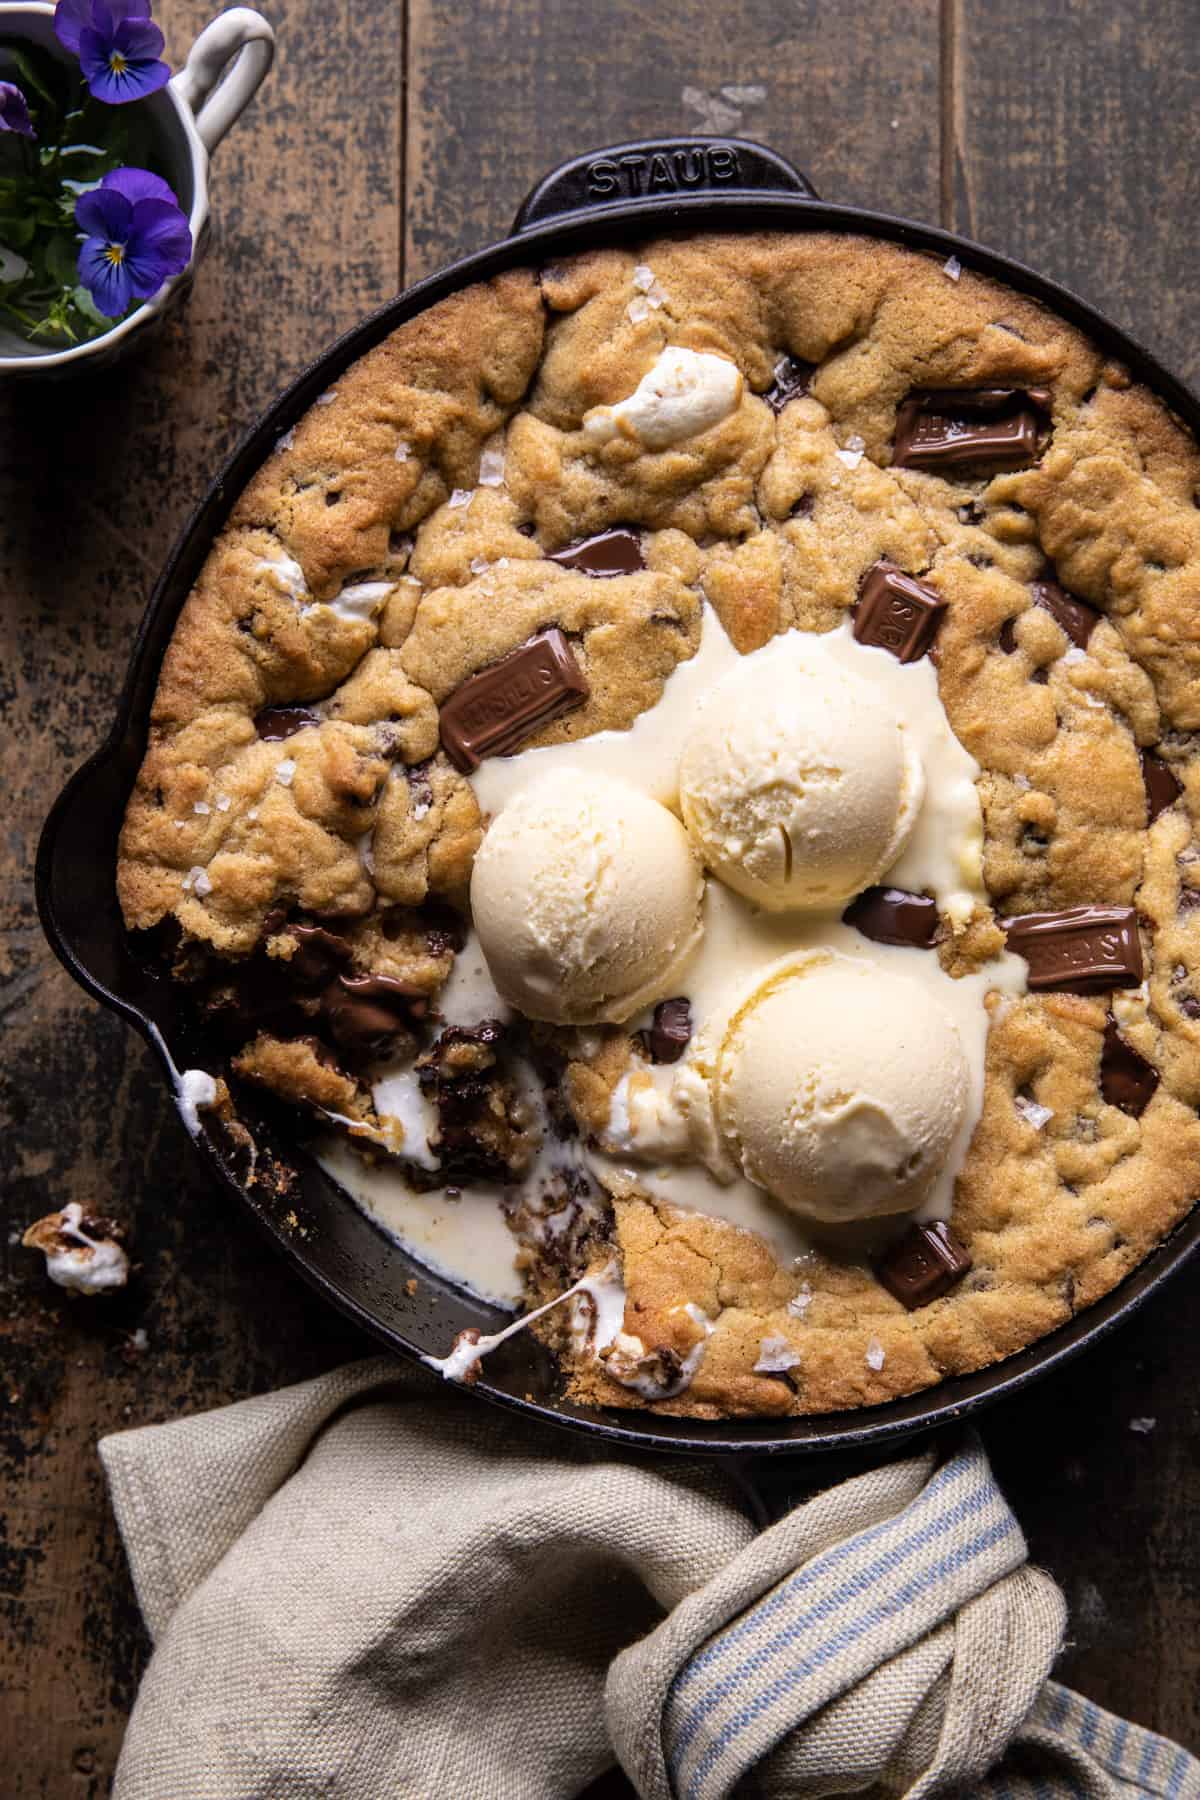 https://www.halfbakedharvest.com/wp-content/uploads/2020/08/Giant-S%E2%80%99mores-Stuffed-Chocolate-Chip-Skillet-Cookie-1.jpg